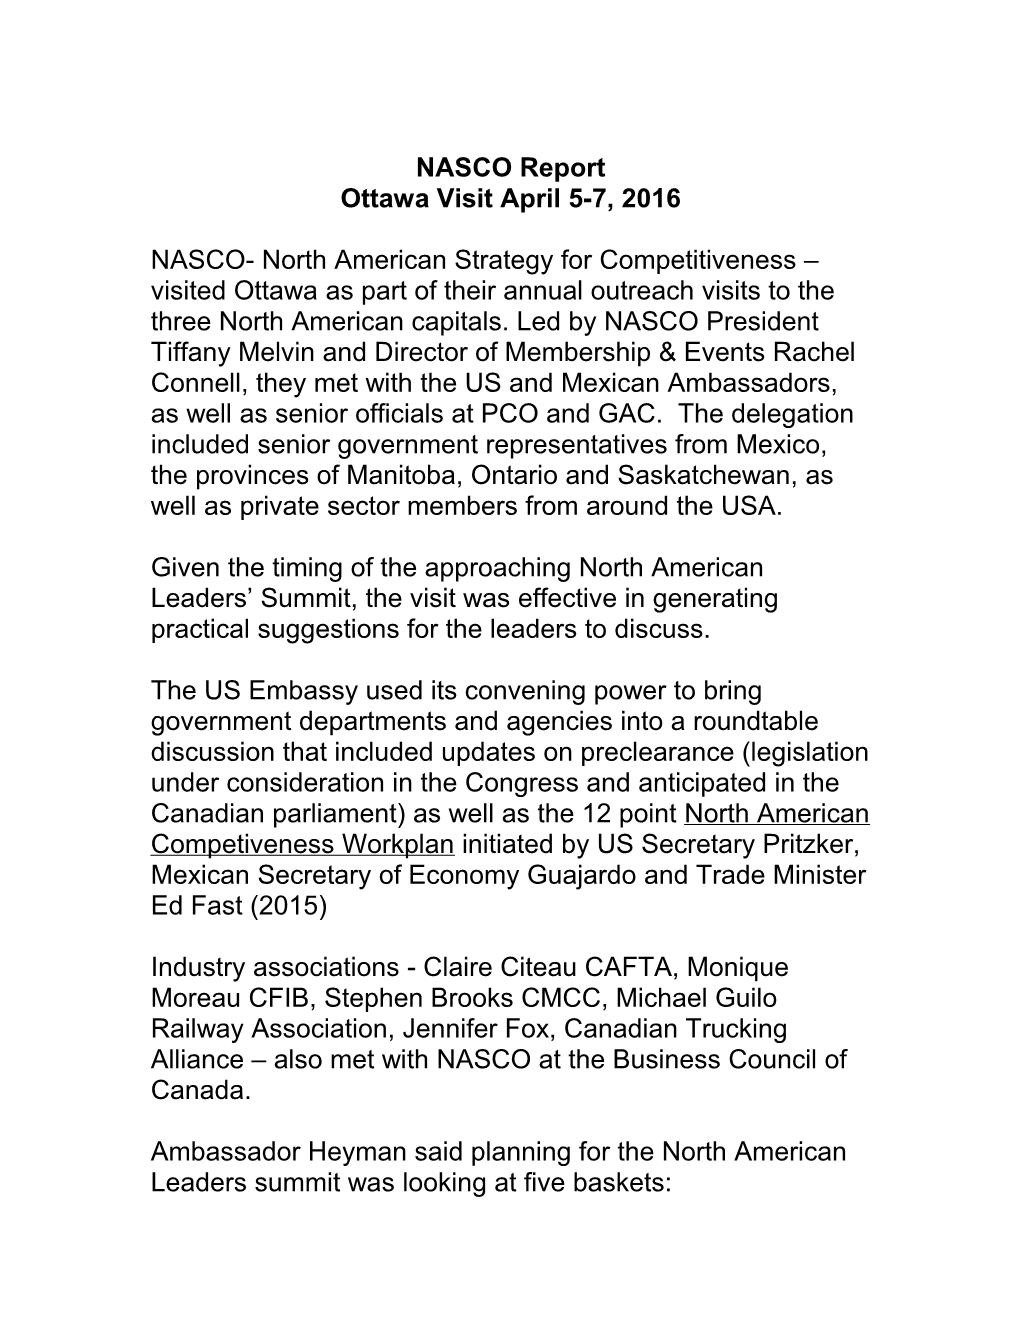 NASCO- North American Strategy for Competitiveness Visited Ottawa As Part of Their Annual